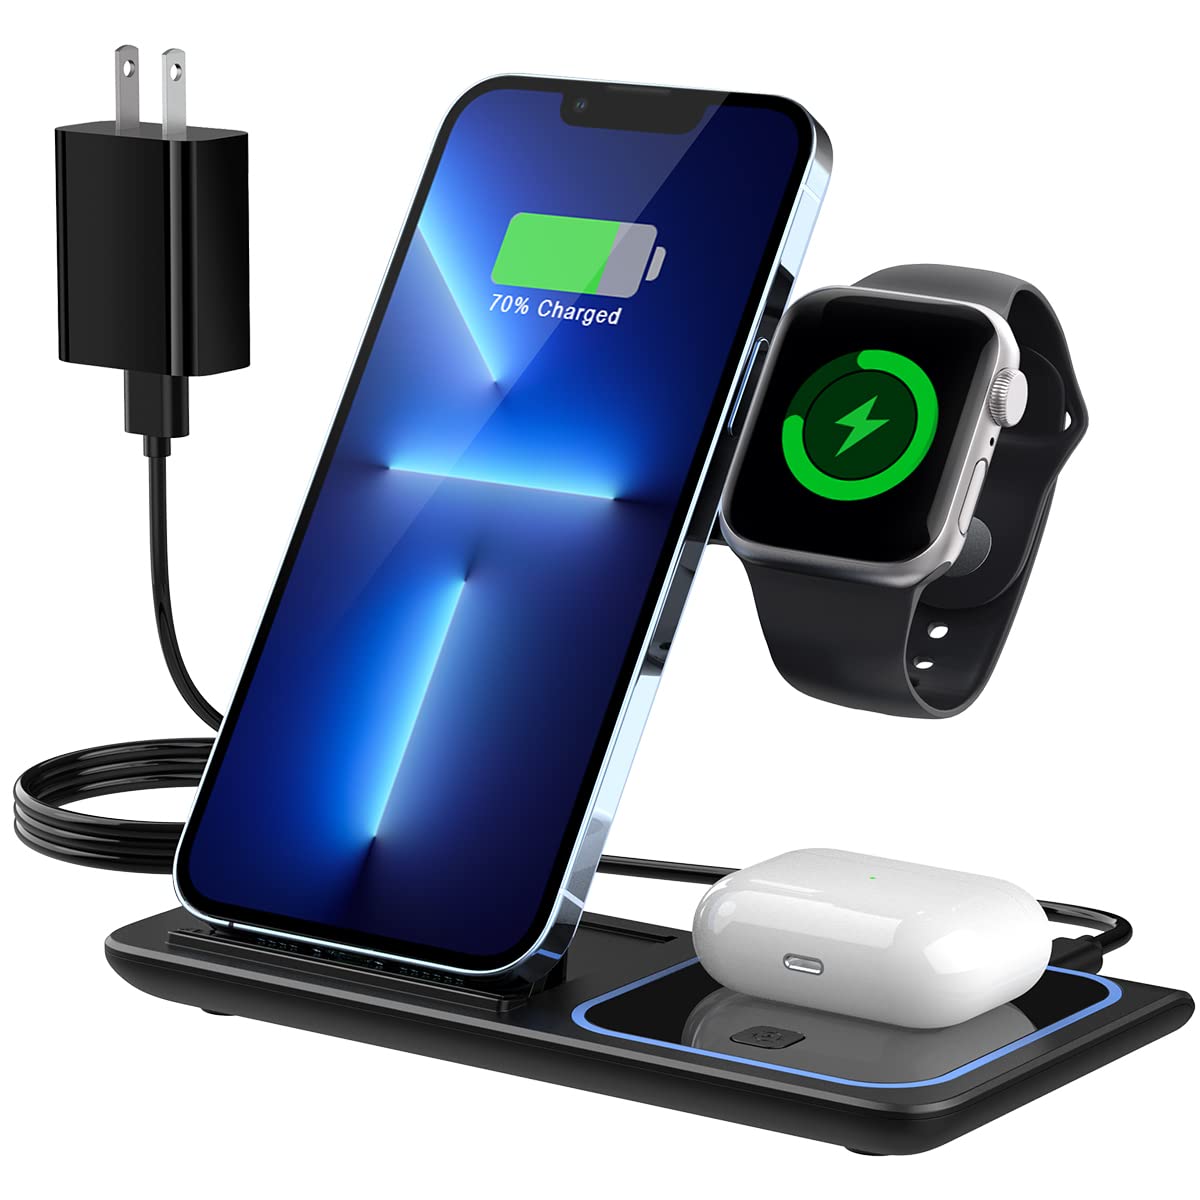 top-phones-featuring-wireless-charging-capability